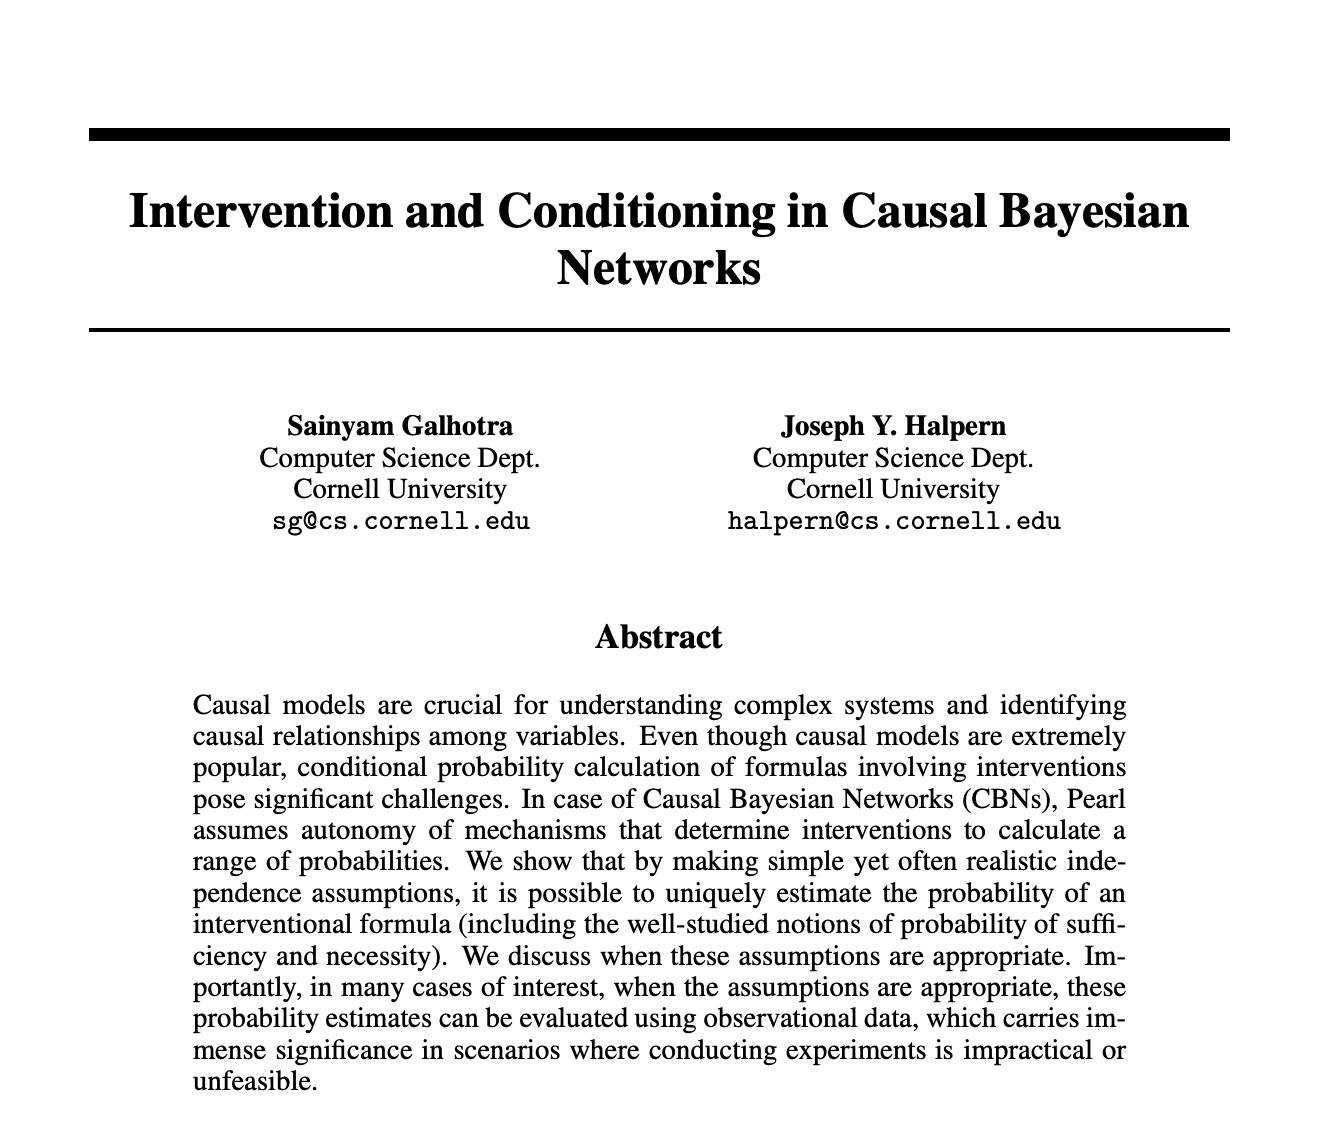  This AI Paper from Cornell Unravels Causal Complexities in Interventional Probability Estimation